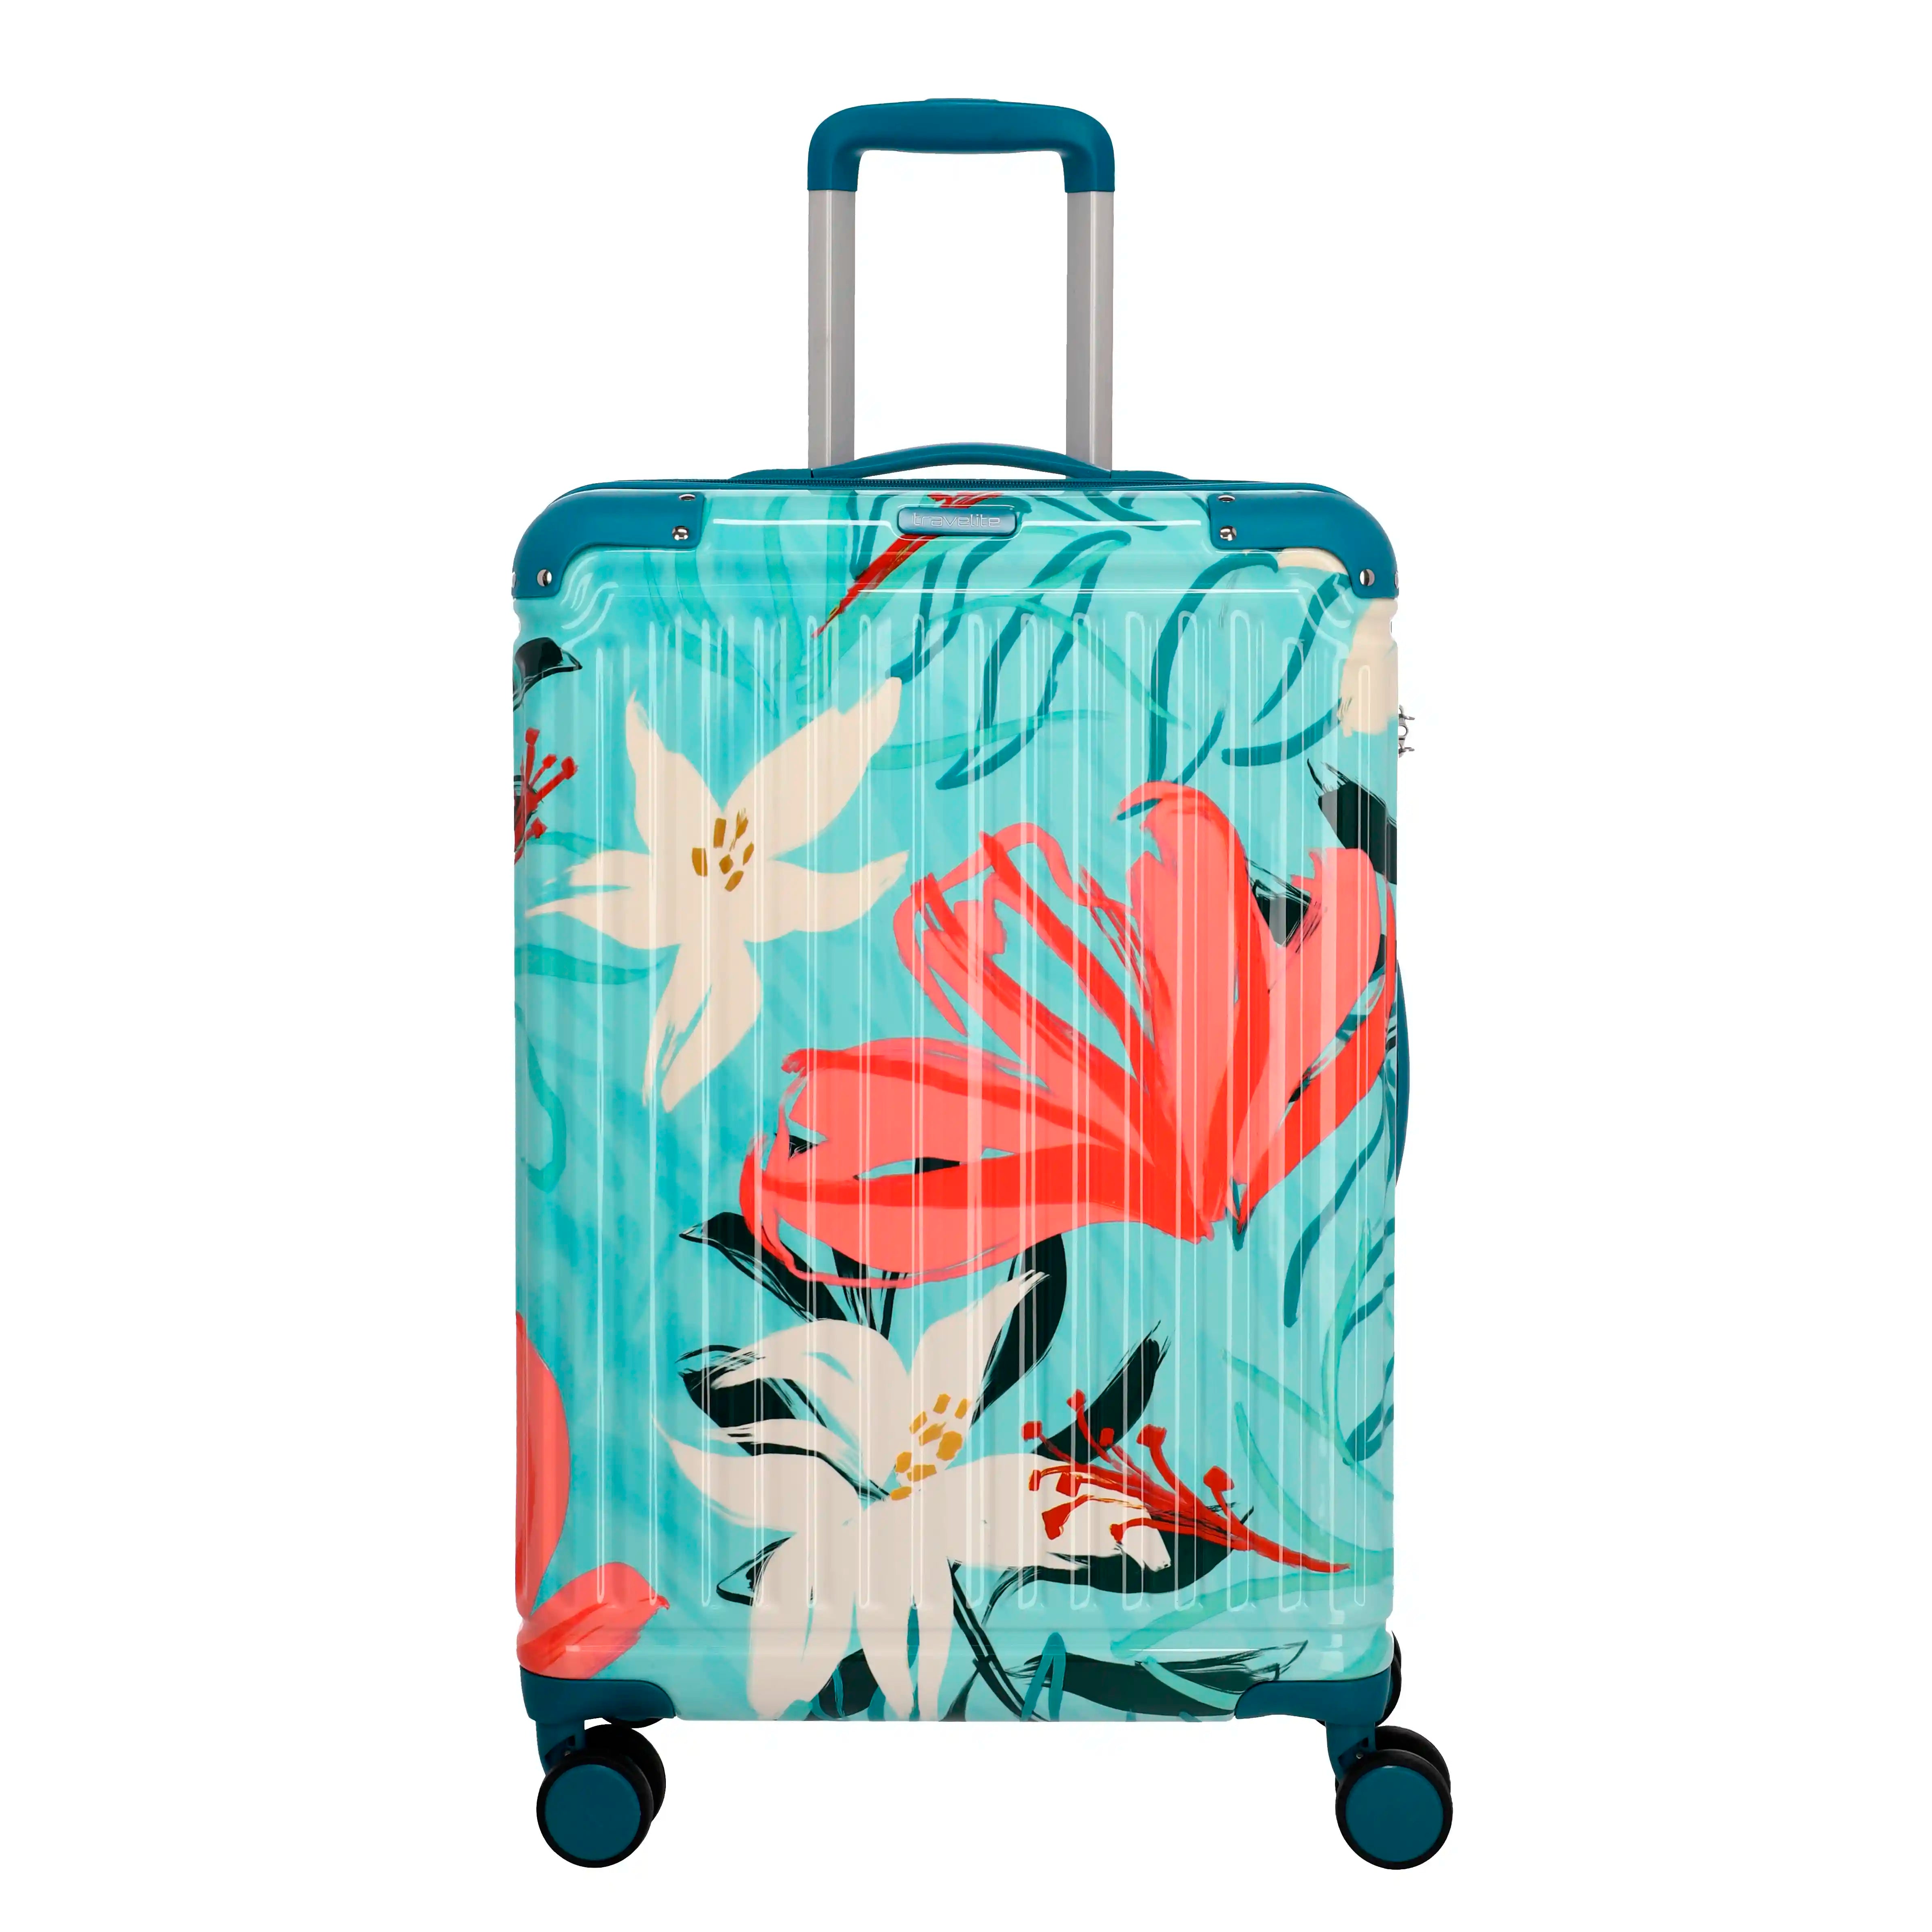 Travelite Cruise 4-wheel trolley 67 cm - Turquoise Lily